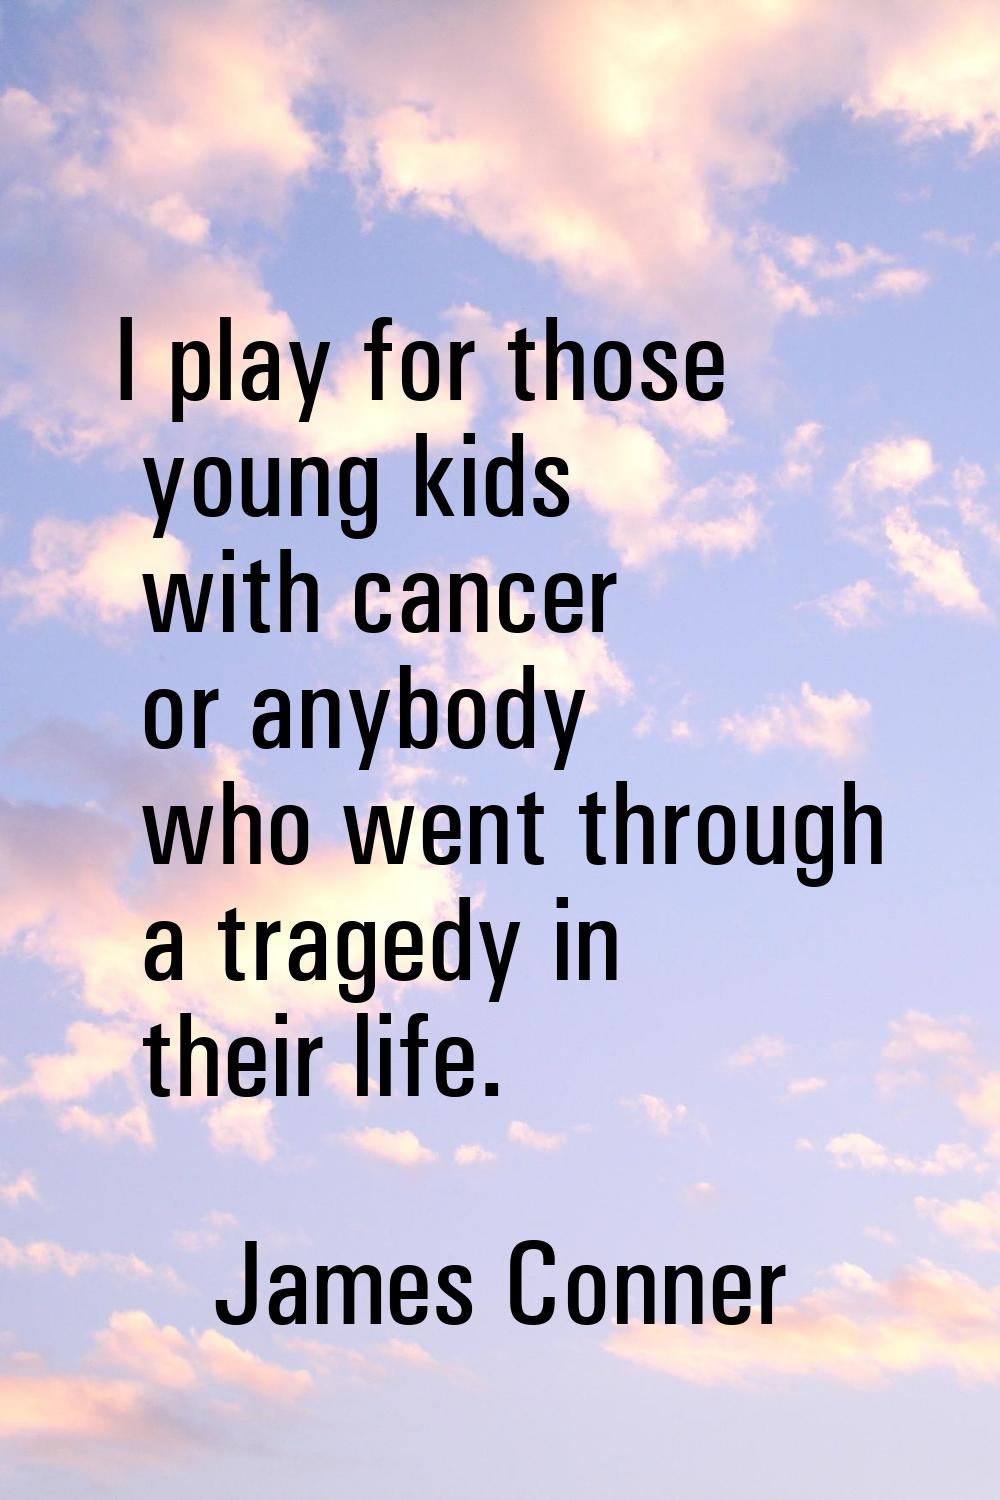 I play for those young kids with cancer or anybody who went through a tragedy in their life.